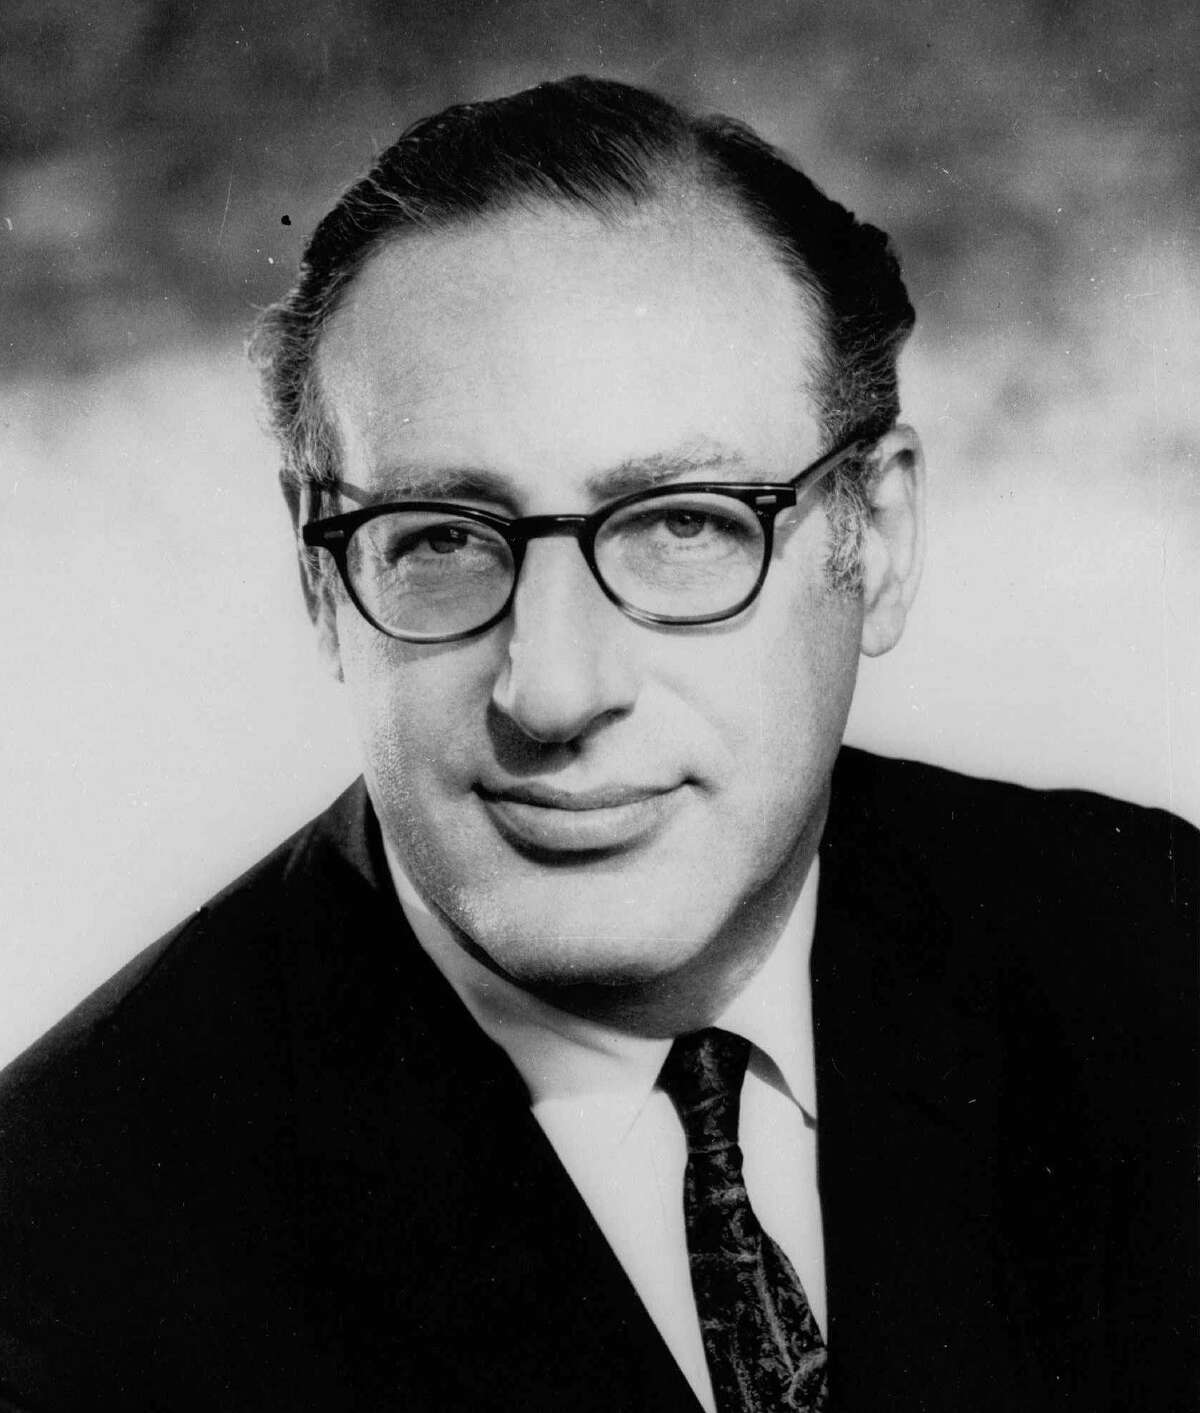 This is a 1970 file photo of Fred Friendly, former president of CBS News. Friendly, the pioneering television producer and onetime president of CBS News, died March 3, 1998, after a series of strokes.